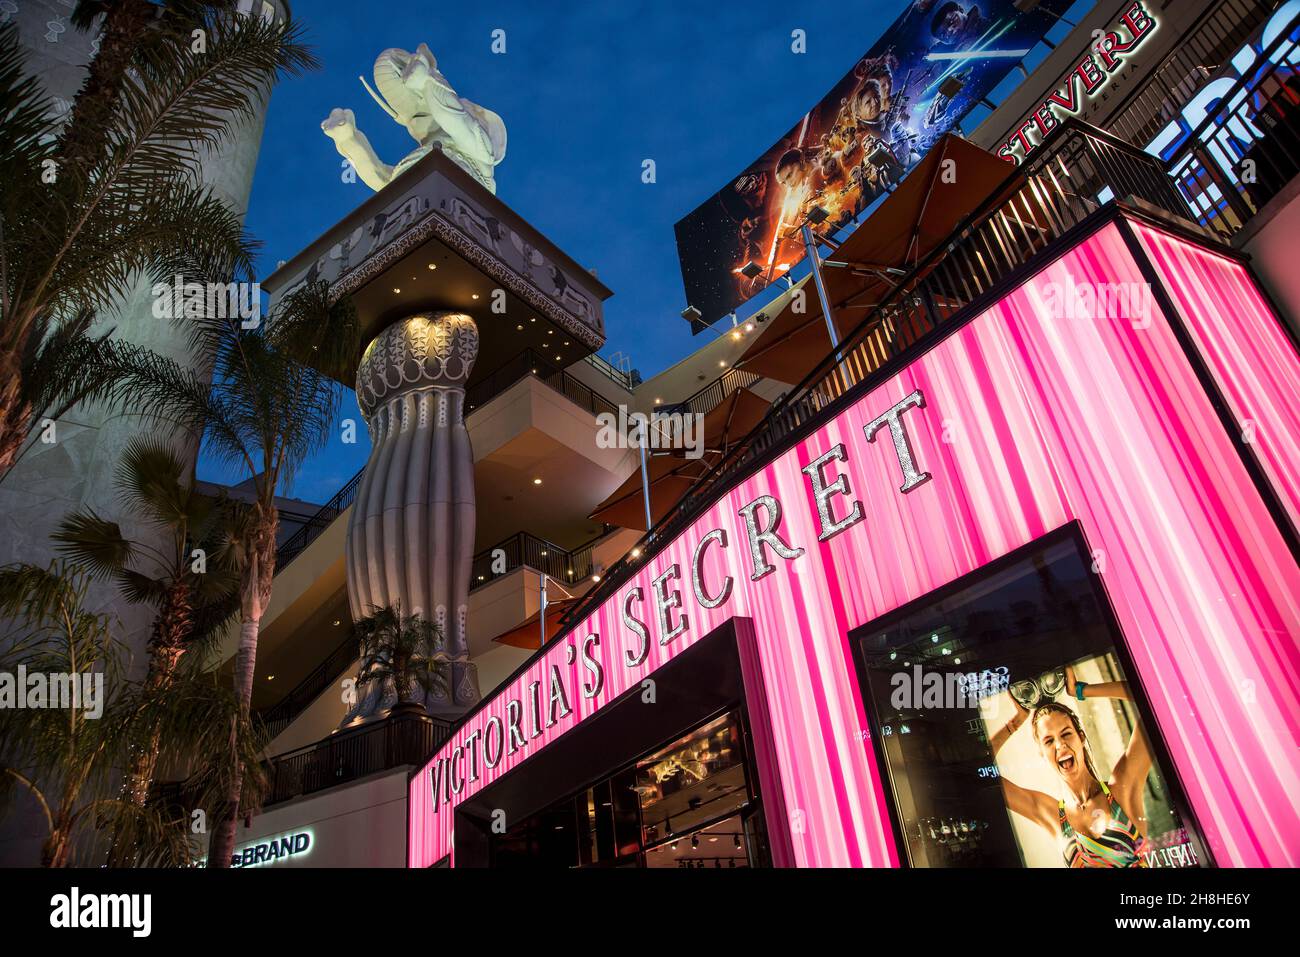 Victoria secret store at Hollywood highland center Stock Photo